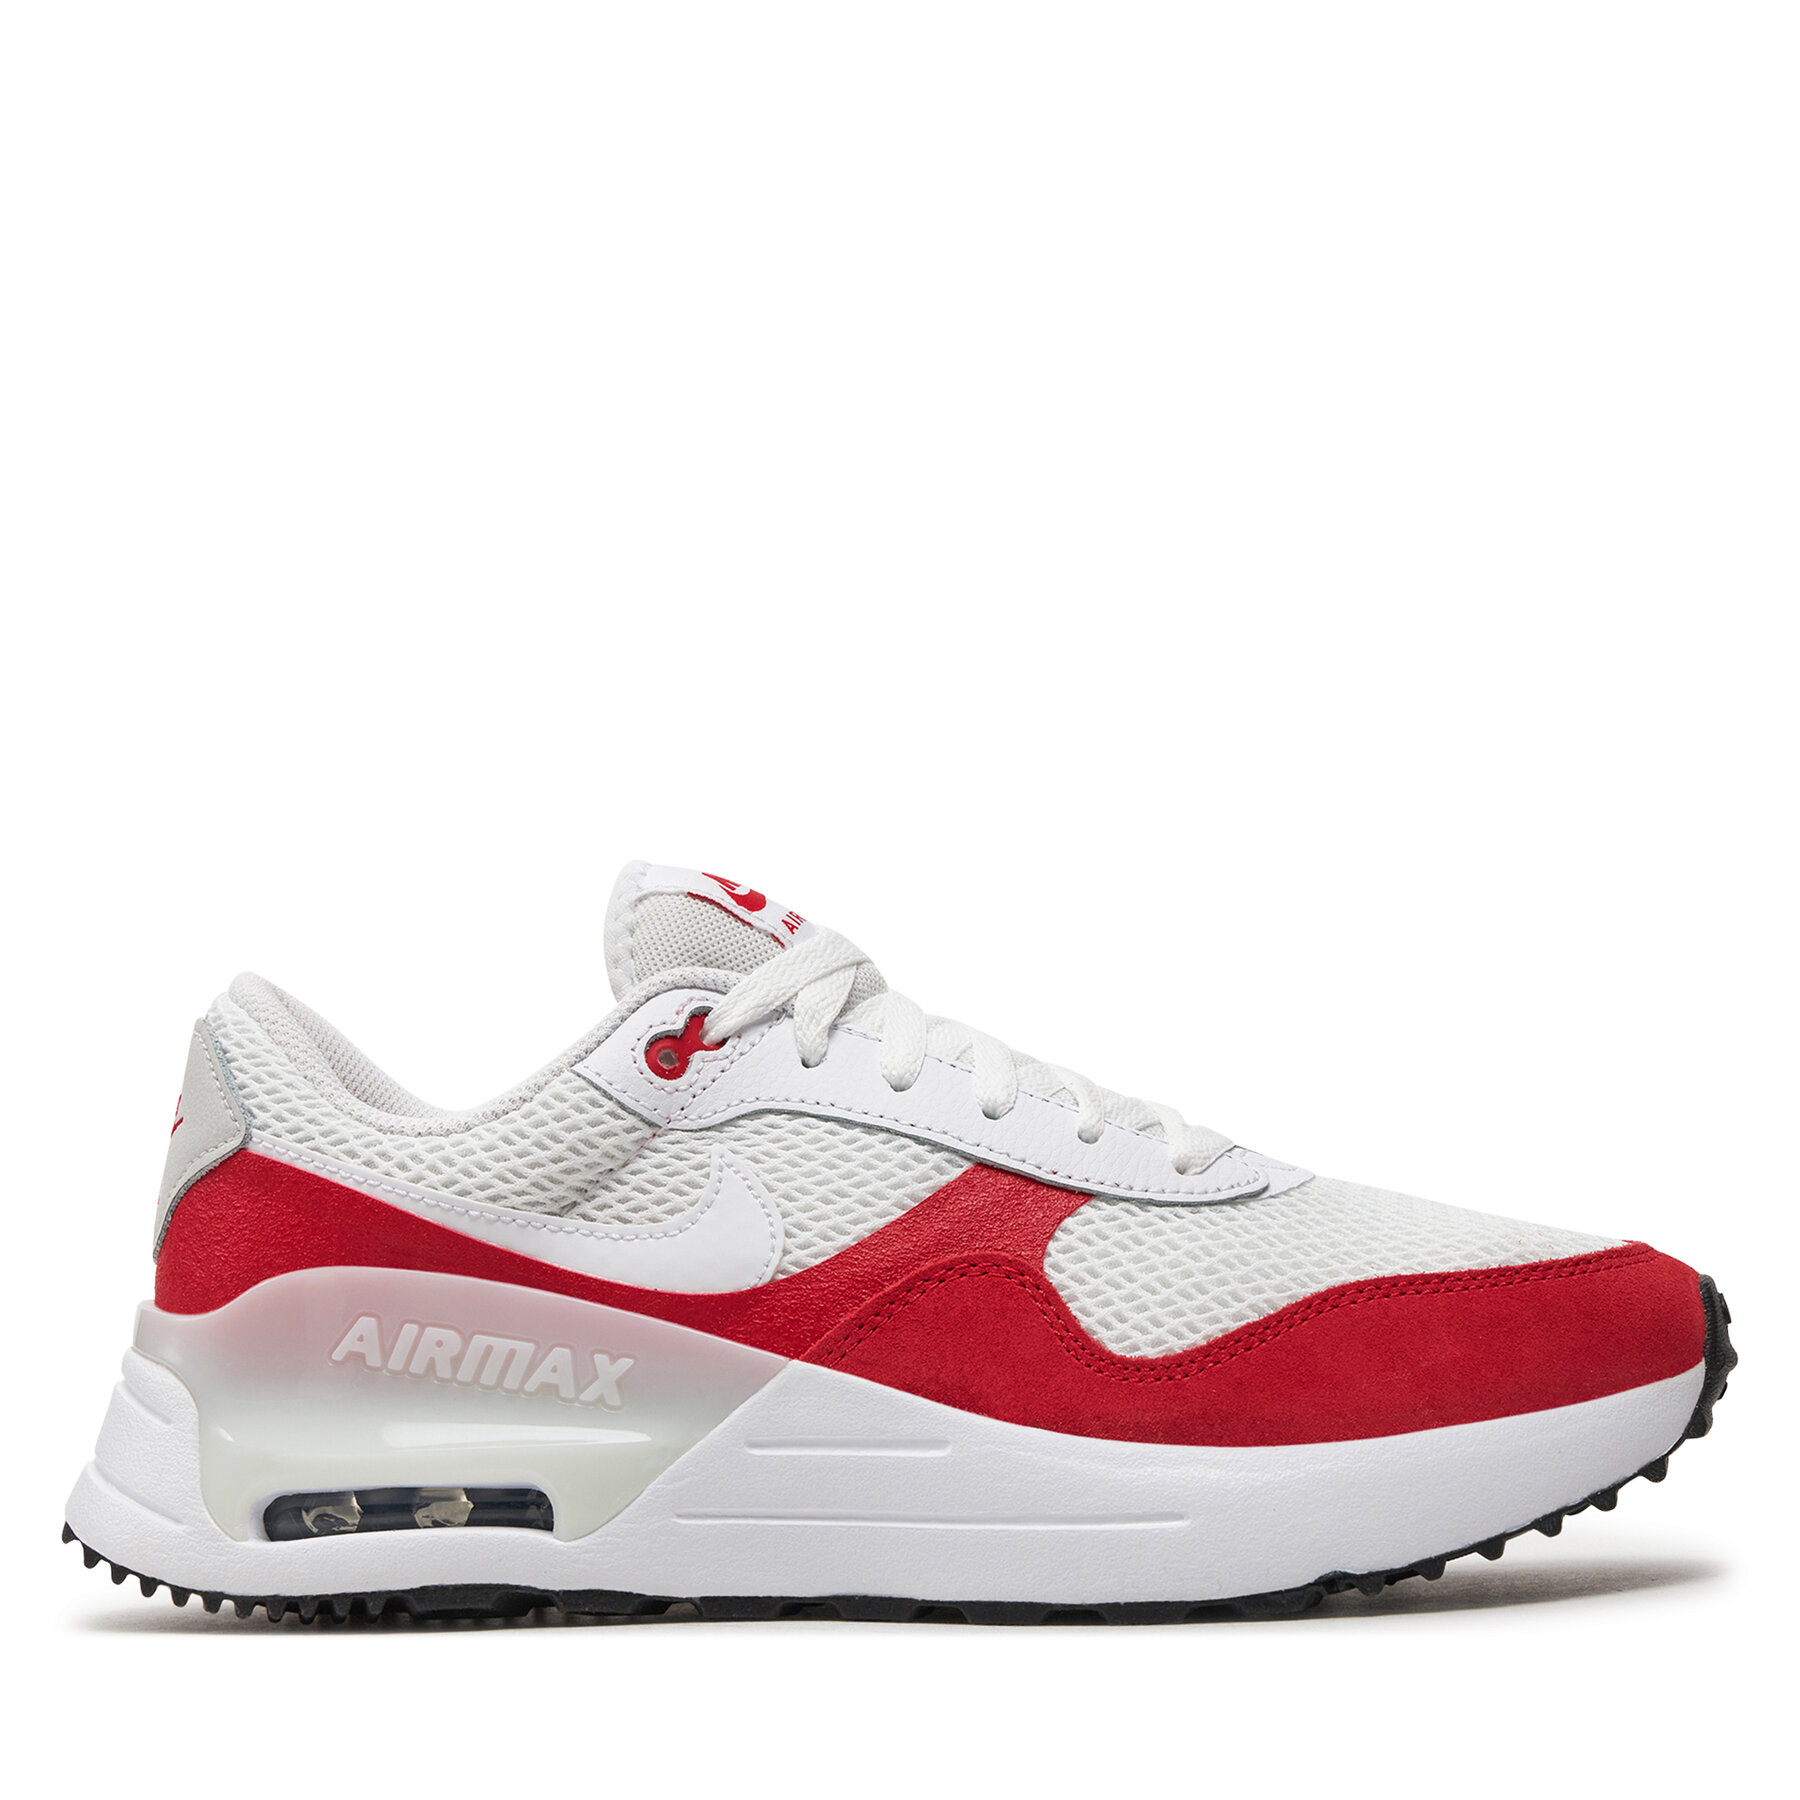 Nike Air Max System white/university red/photon dust/white